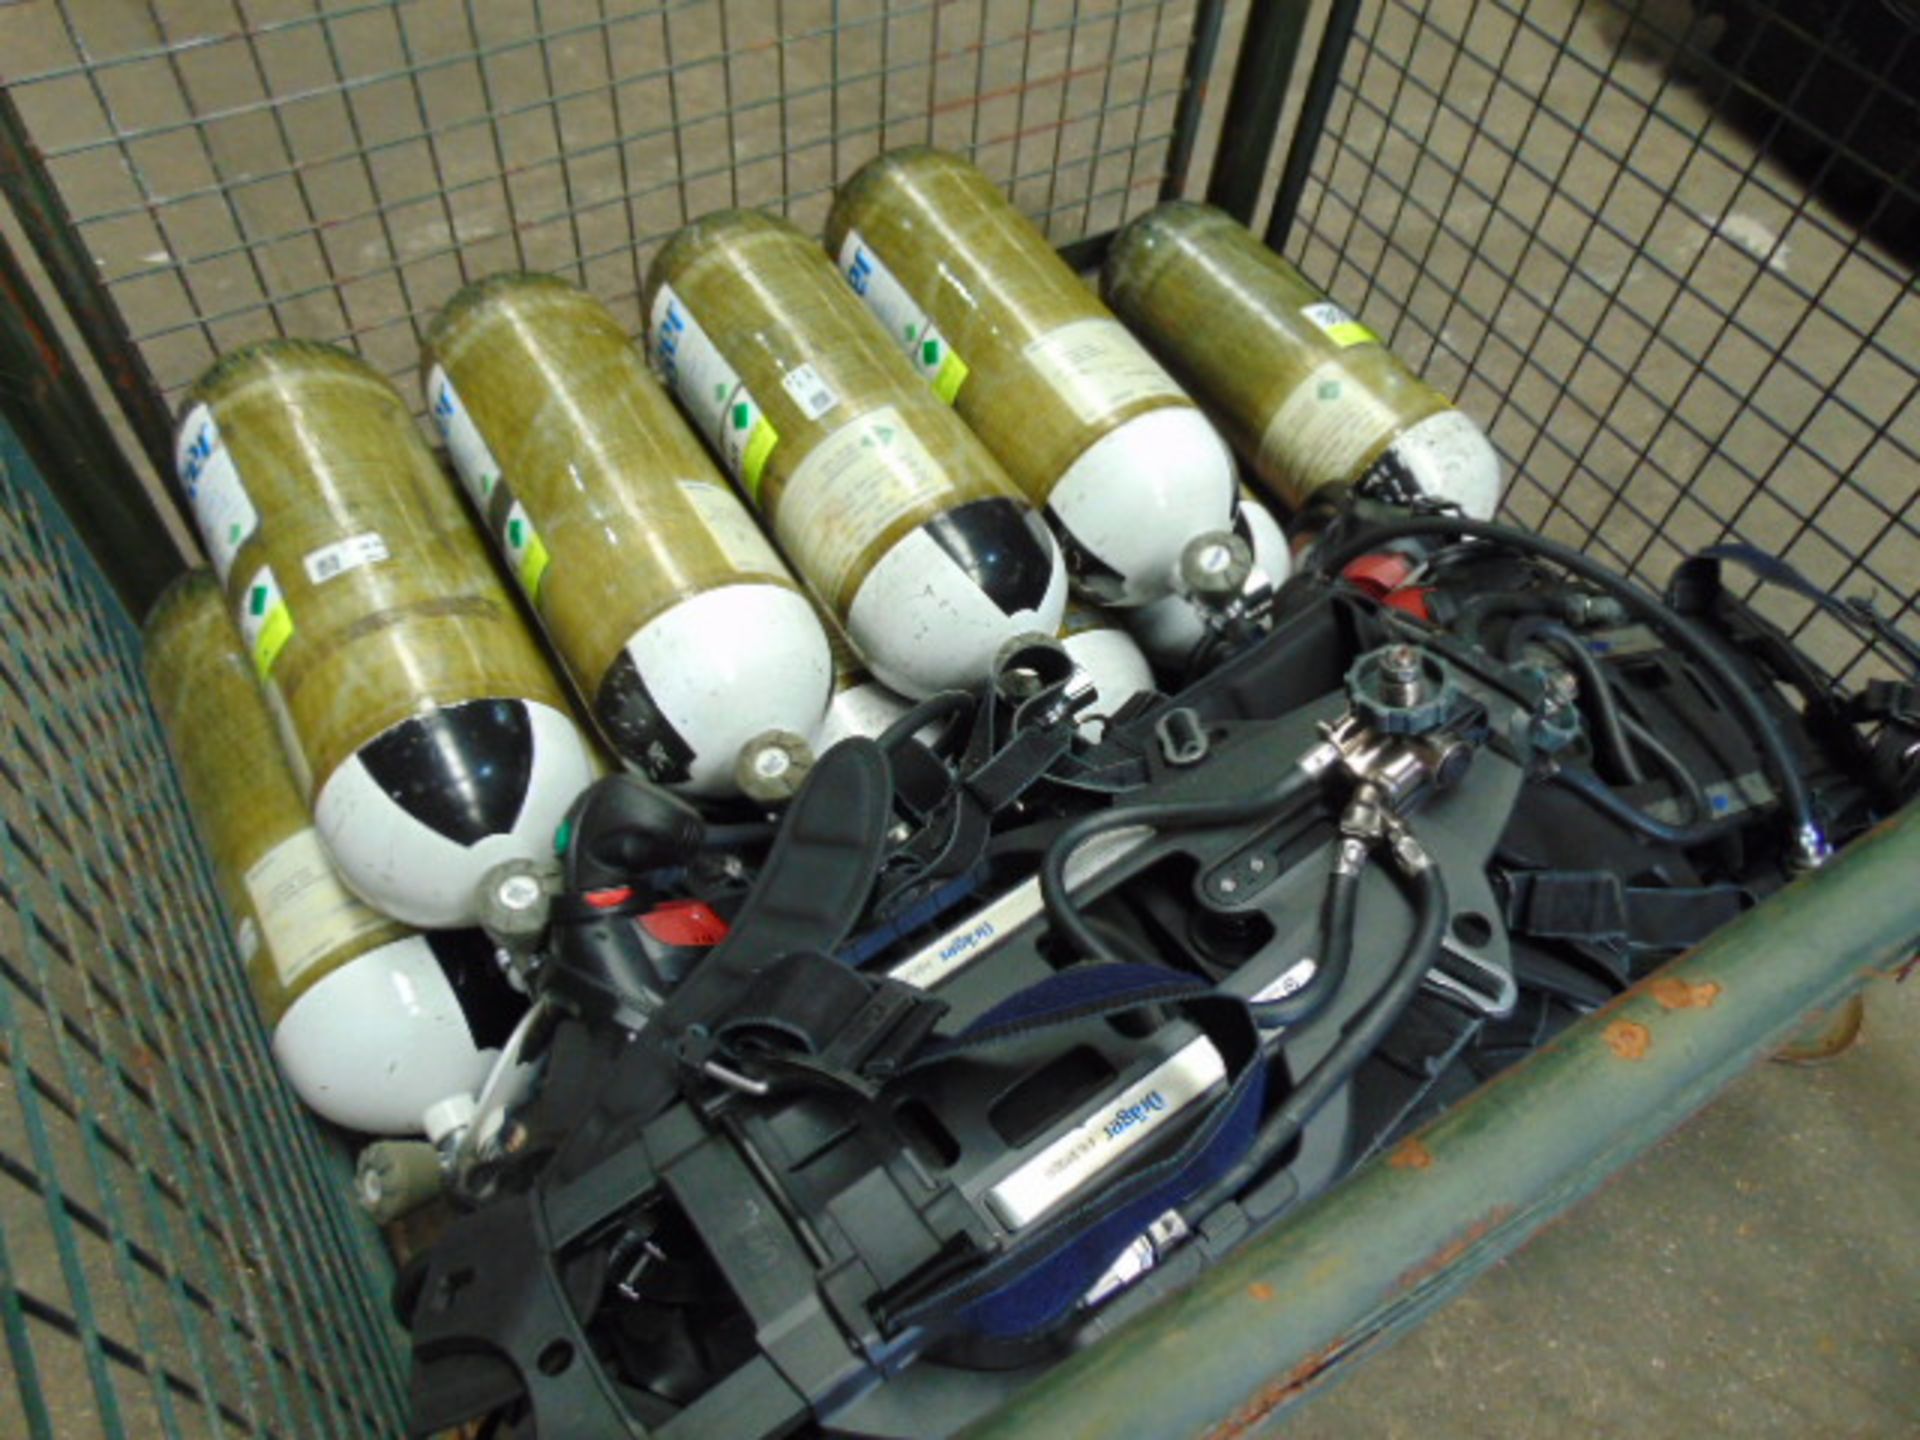 5 x Drager PSS 7000 Self Contained Breathing Apparatus w/ 10 x Drager 300 Bar Air Cylinders - Image 23 of 27